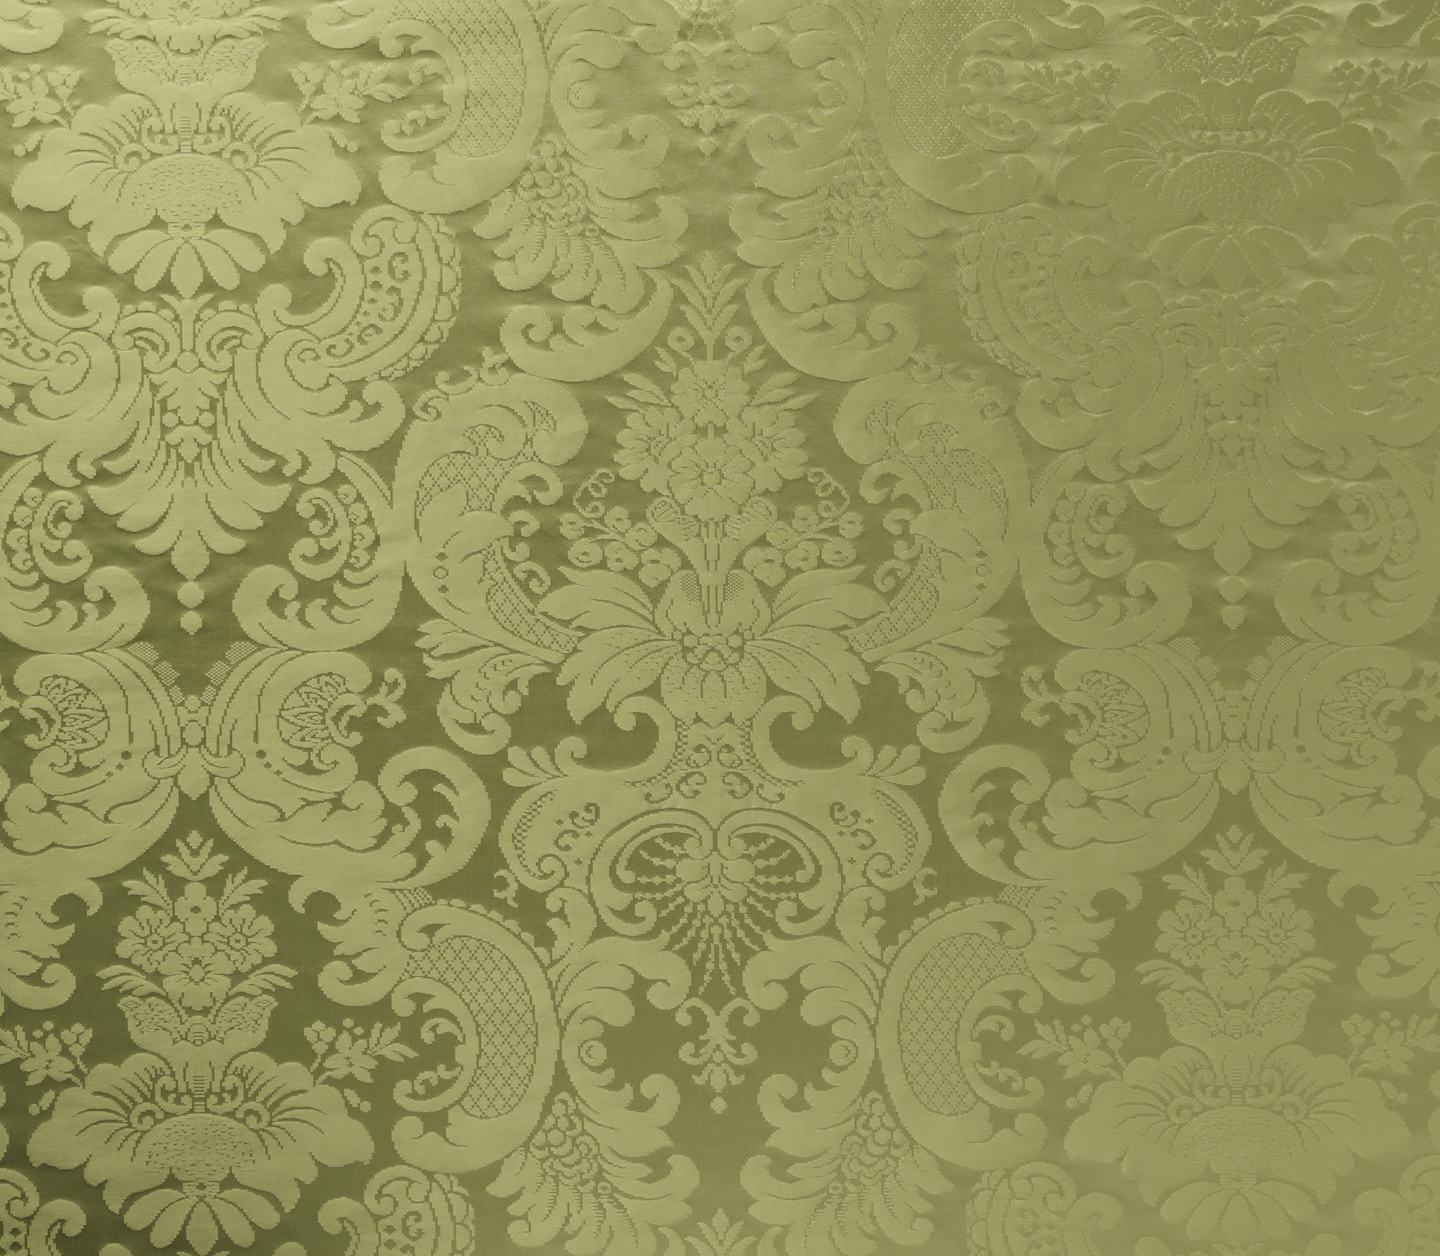 HD wallpaper Green Damask Background white and black floral fabric cover   Wallpaper Flare